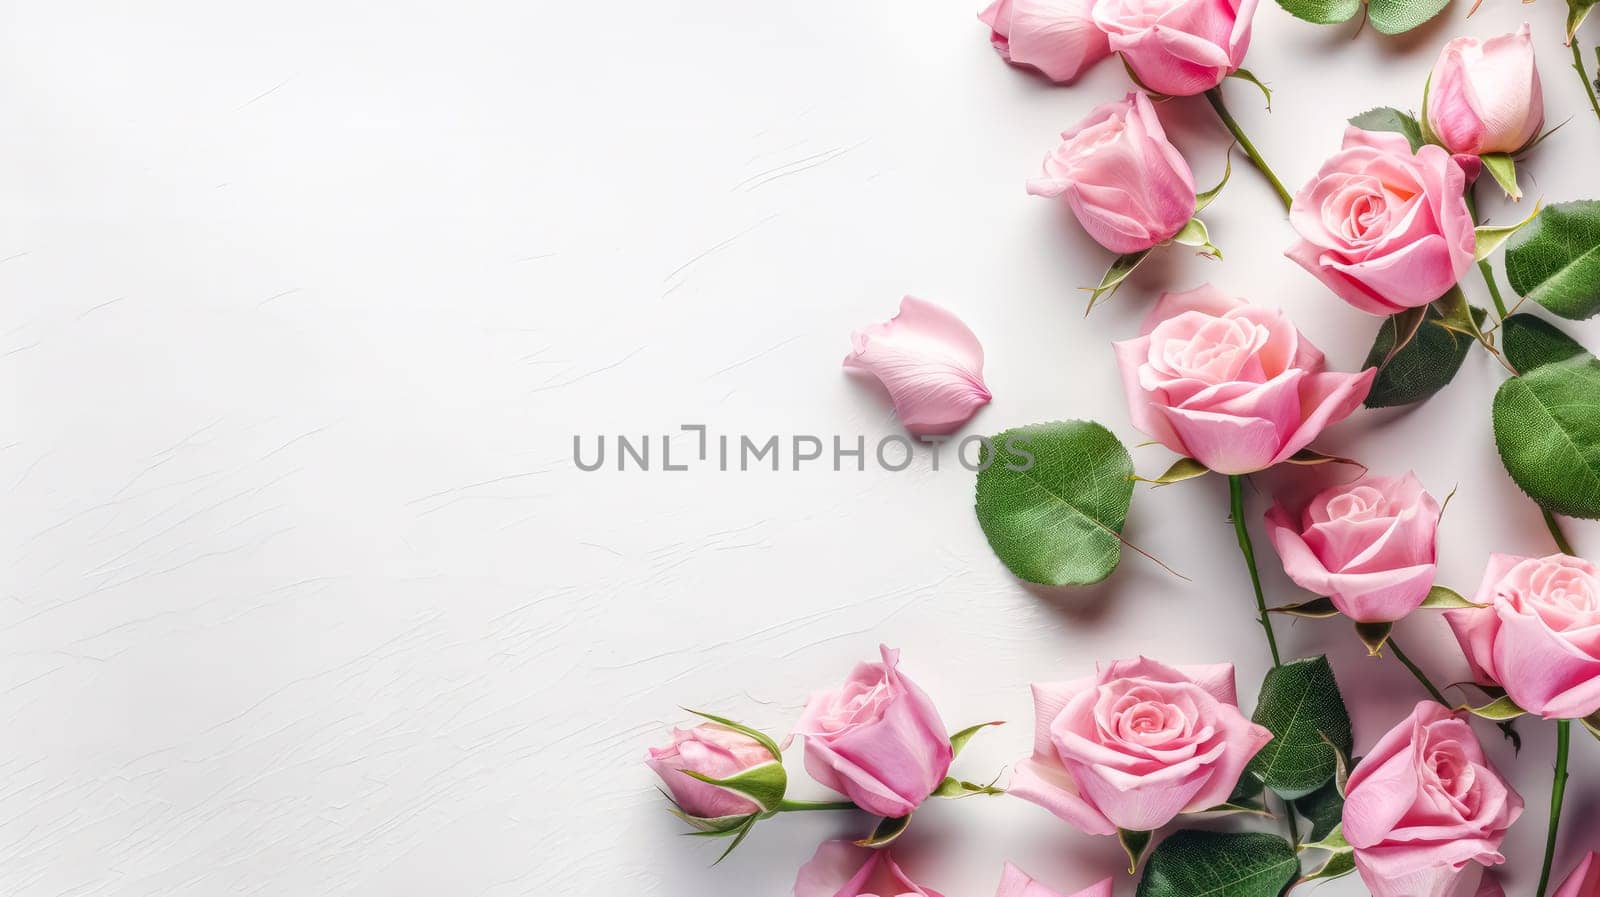 Elegant flat lay composition featuring a delicate framework made of roses on a clean white background. A timeless and romantic floral arrangement.